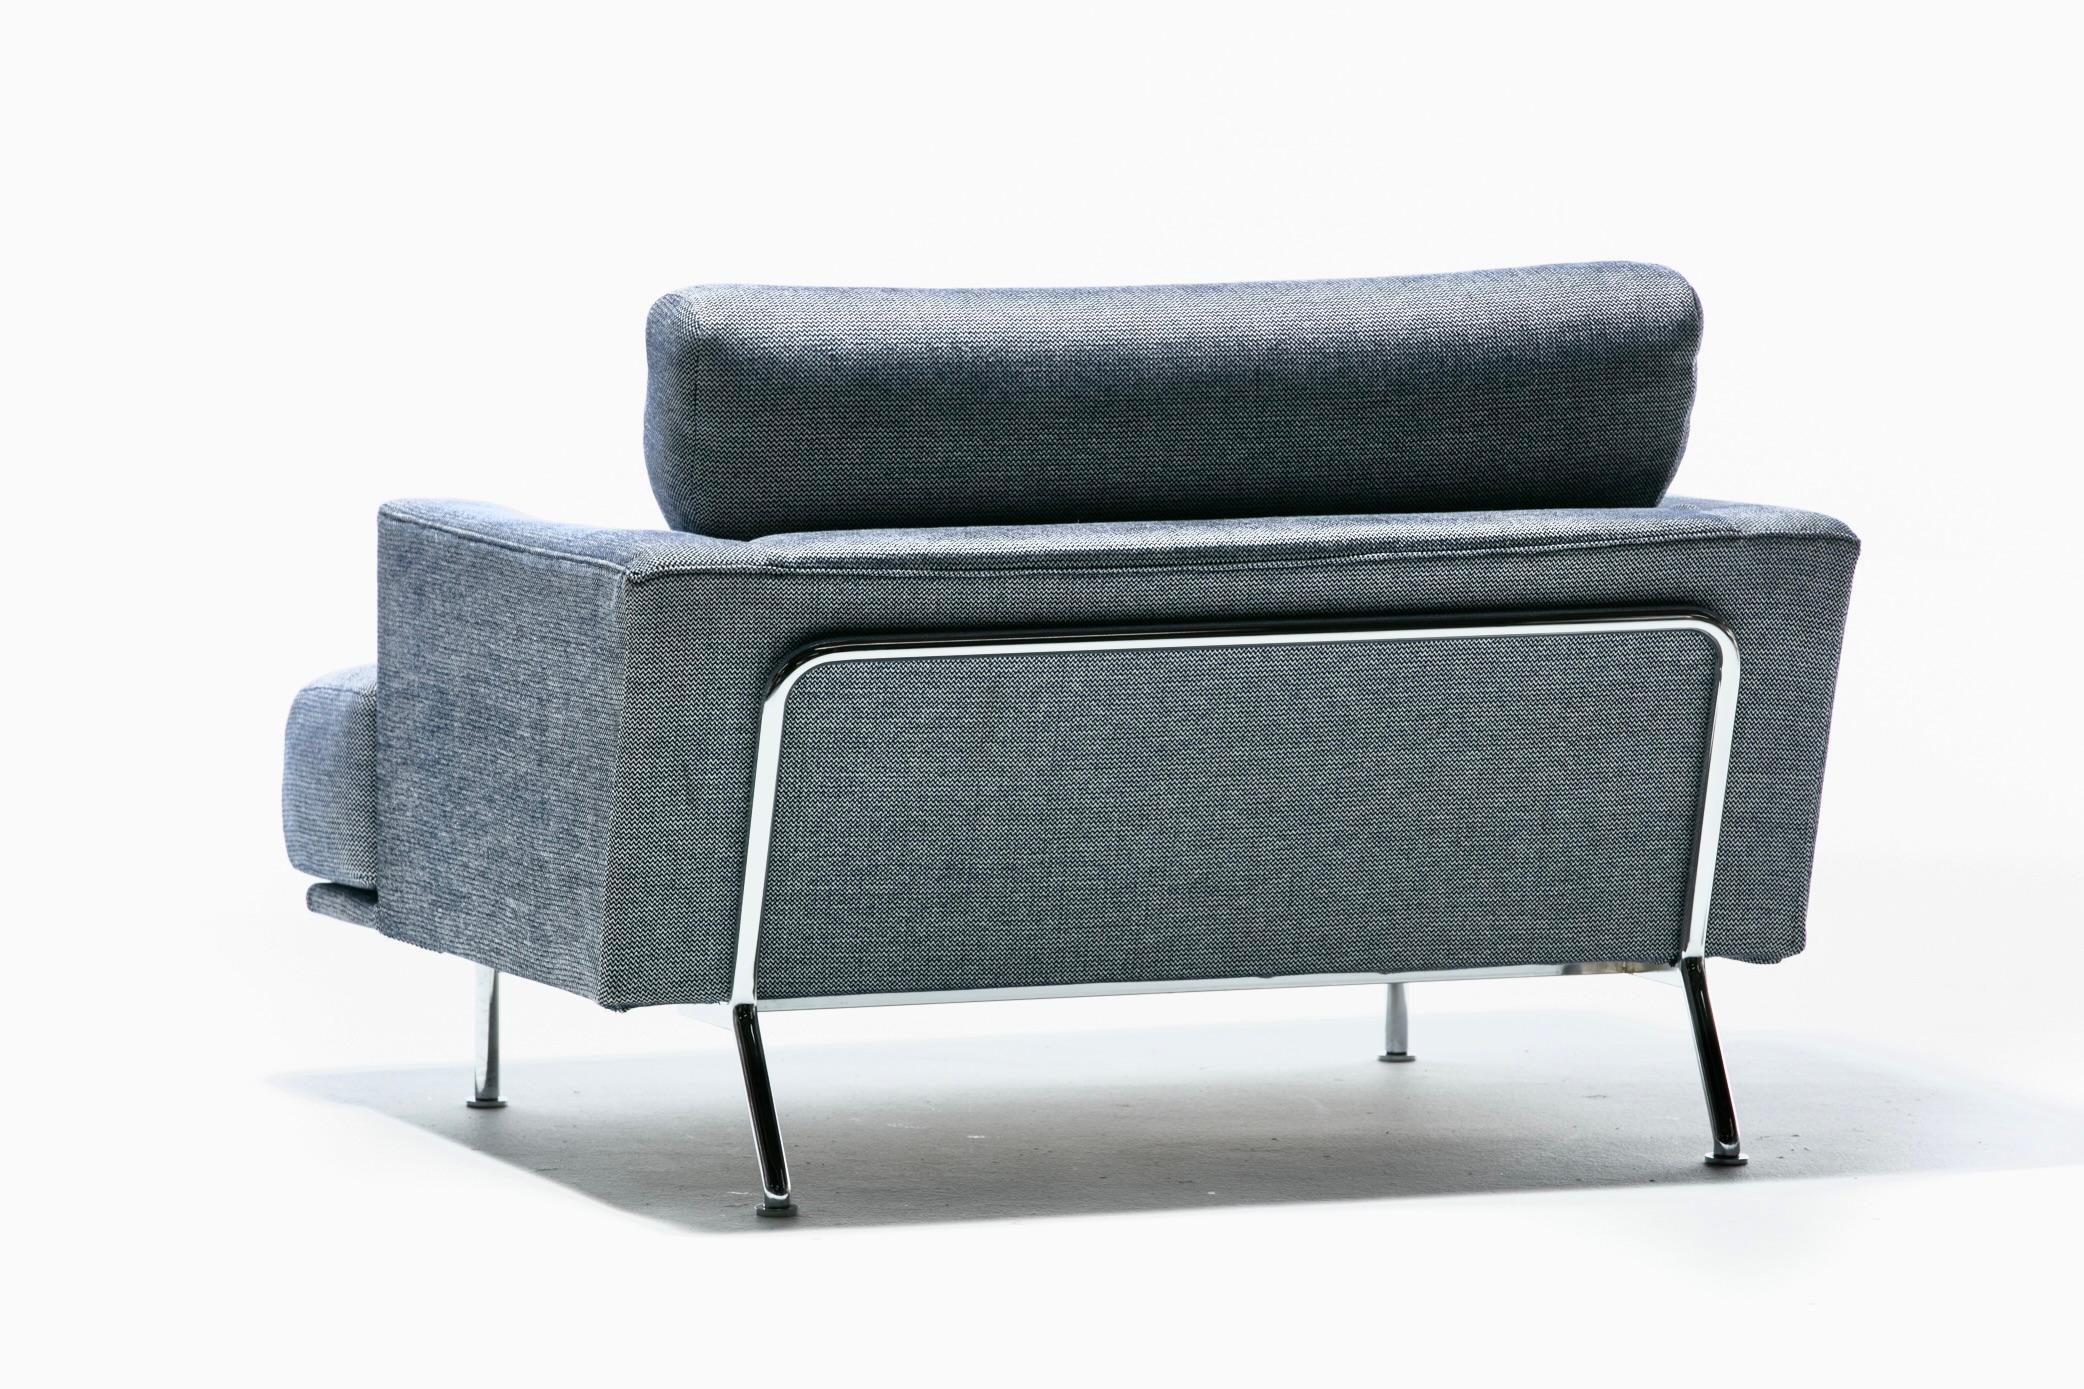 Pair of Imported Italian Modern Cassina 253 Nest Lounge Chairs by Piero Lissoni  1